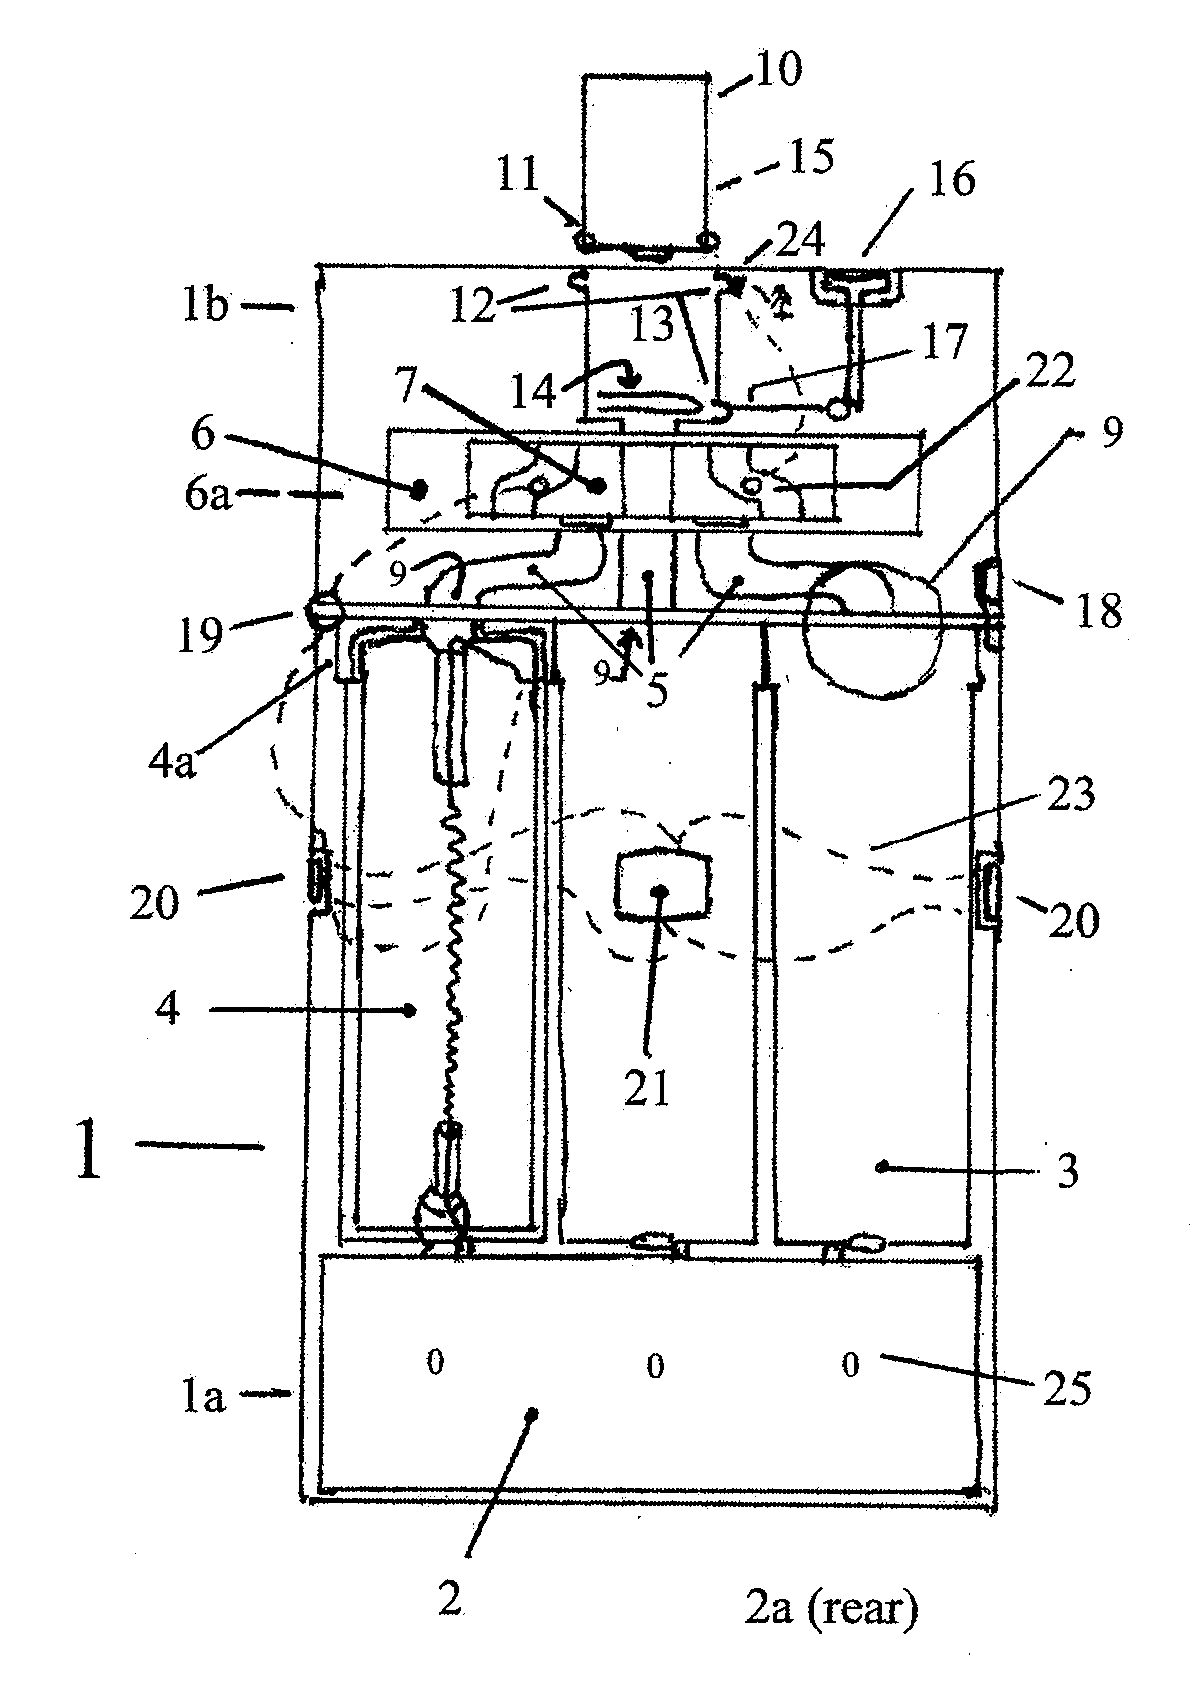 Vapor device with switch assembly